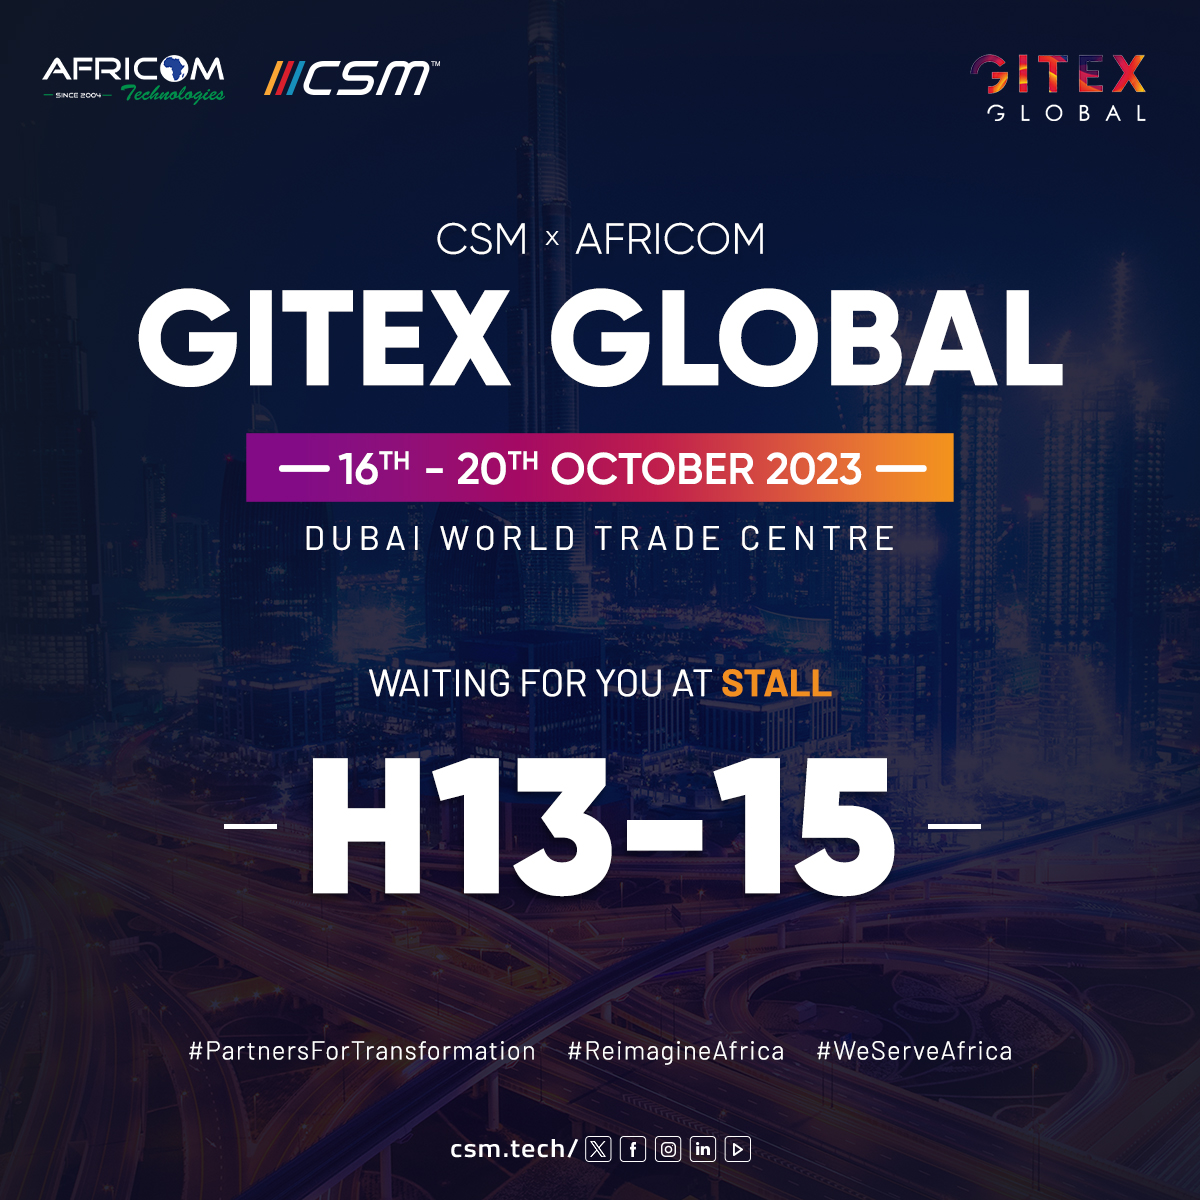 CSM & AFRICOM will be waiting to greet you all at the GITEX Global 2023 at Dubai World Trade Centre. Let's connect.  

#CSMTech #PartnersForTransformation #ReimagineAfrica #WeServeAfrica